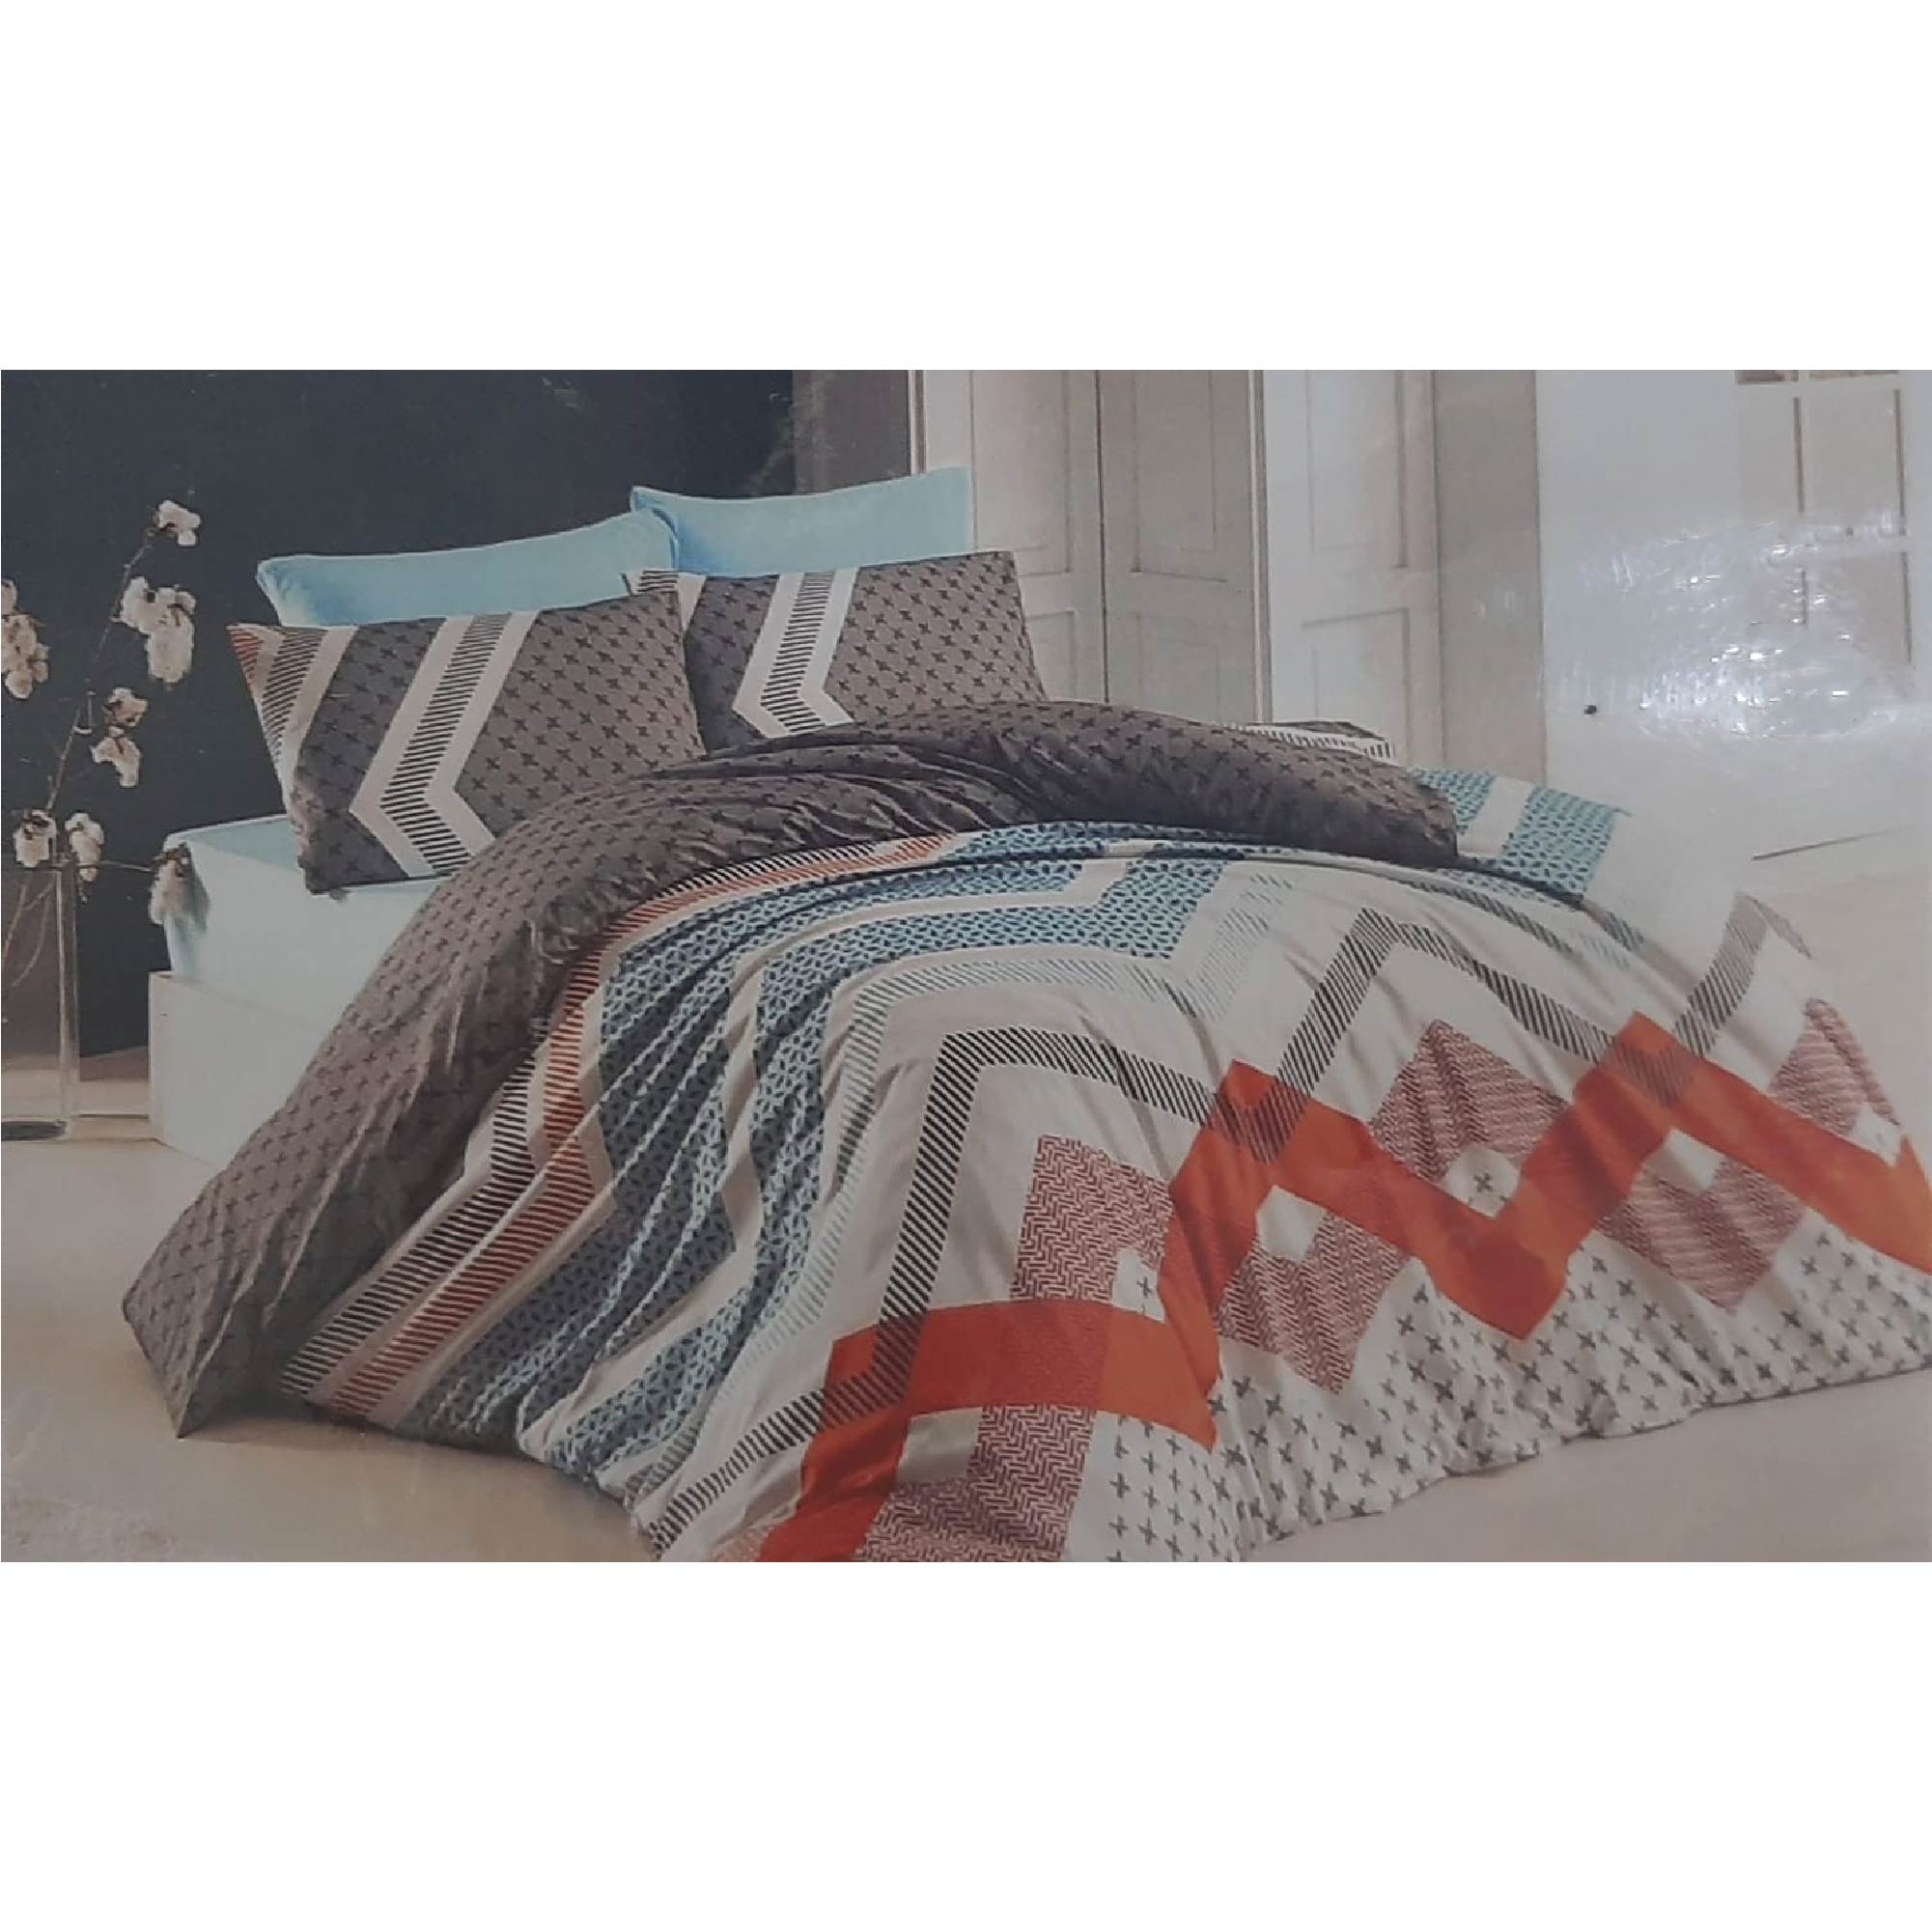 Windsor White/Red/Black Luxury Bed Linen Collection Double, WIN-8407WRBLK